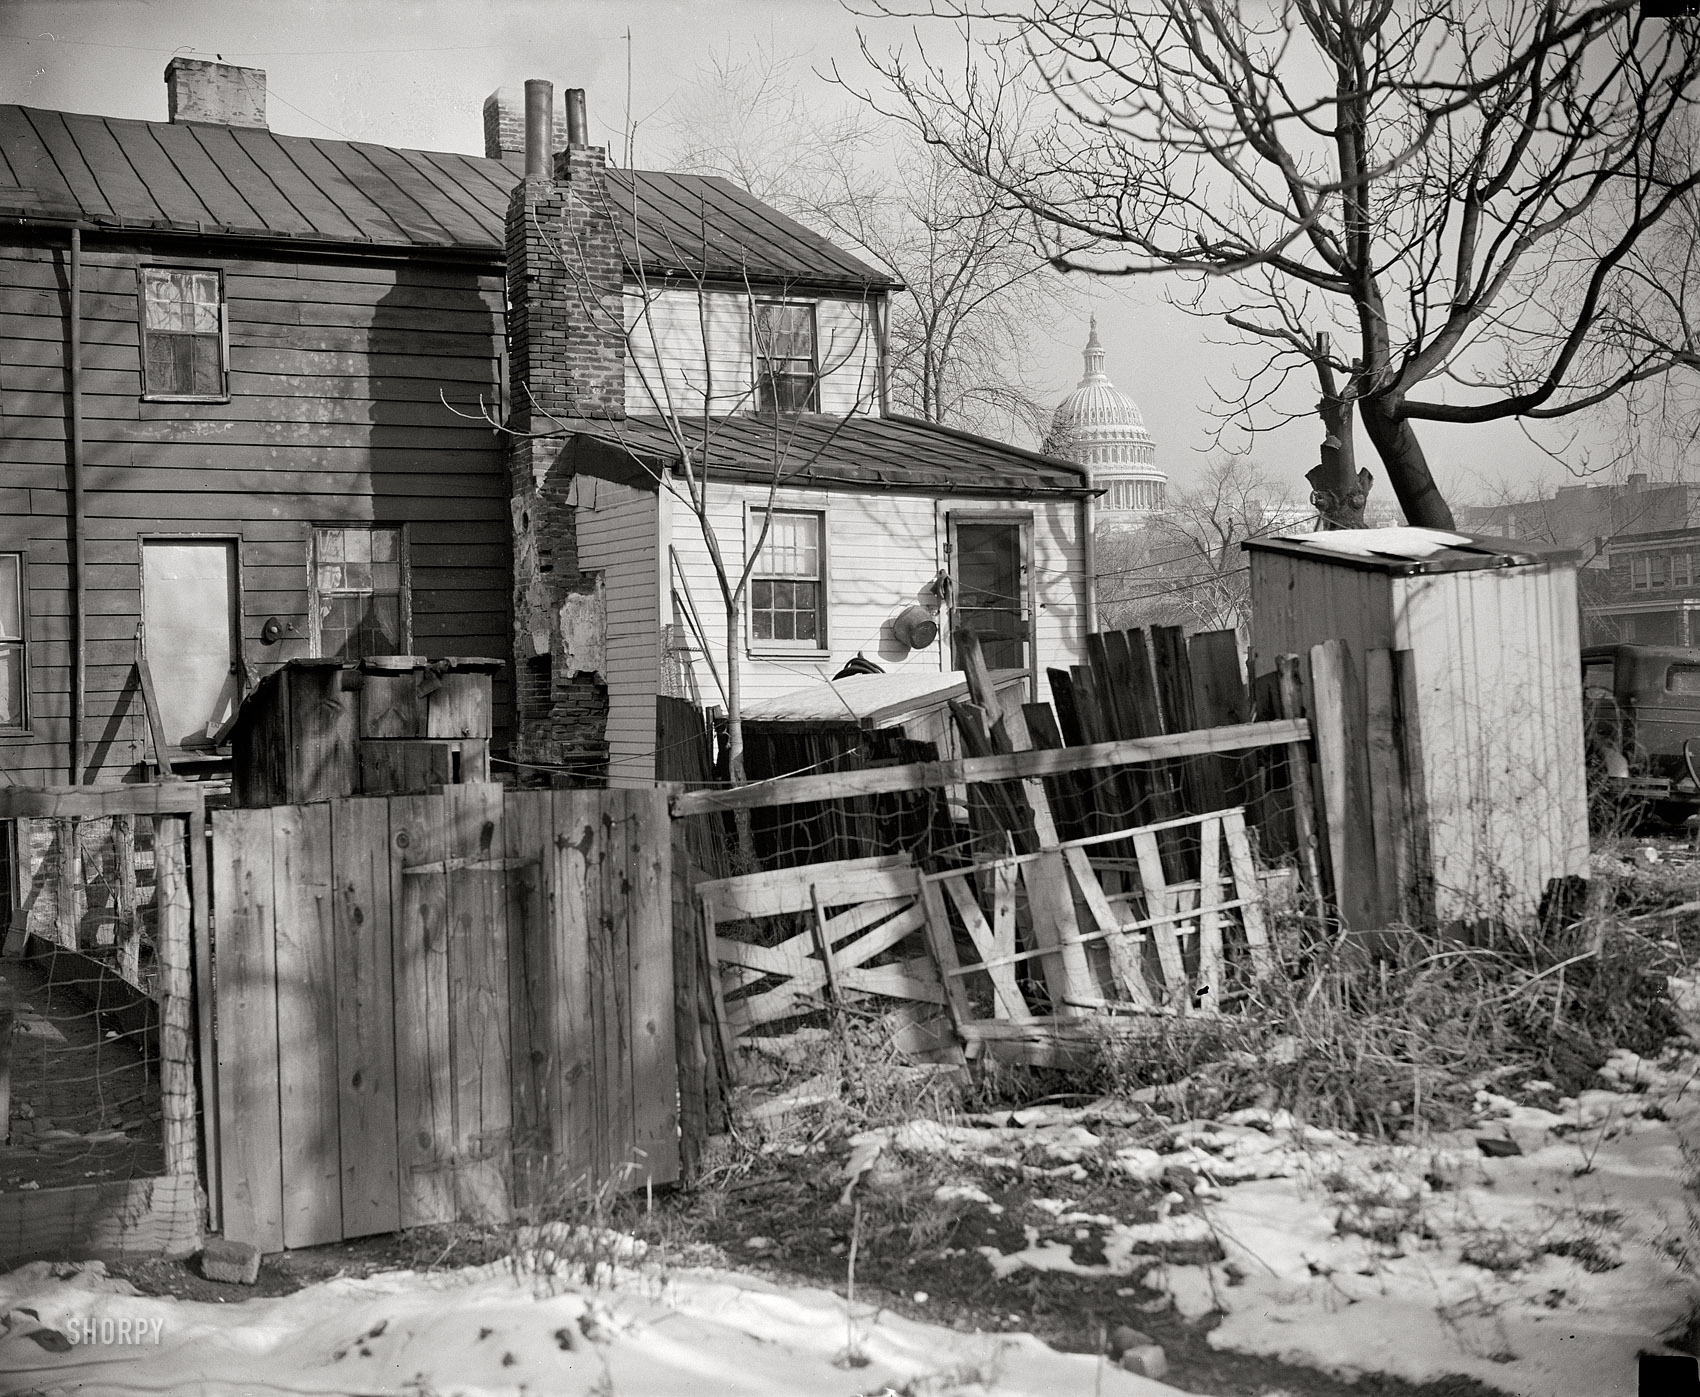 November 30, 1938. "Now that President Roosevelt has approved the $15 million low rent housing program for the District of Columbia, such slum scenes as this will disappear from the 'city beautiful.' This picture was made within a stone's throw of the U.S. Capitol." Harris & Ewing glass negative. View full size.